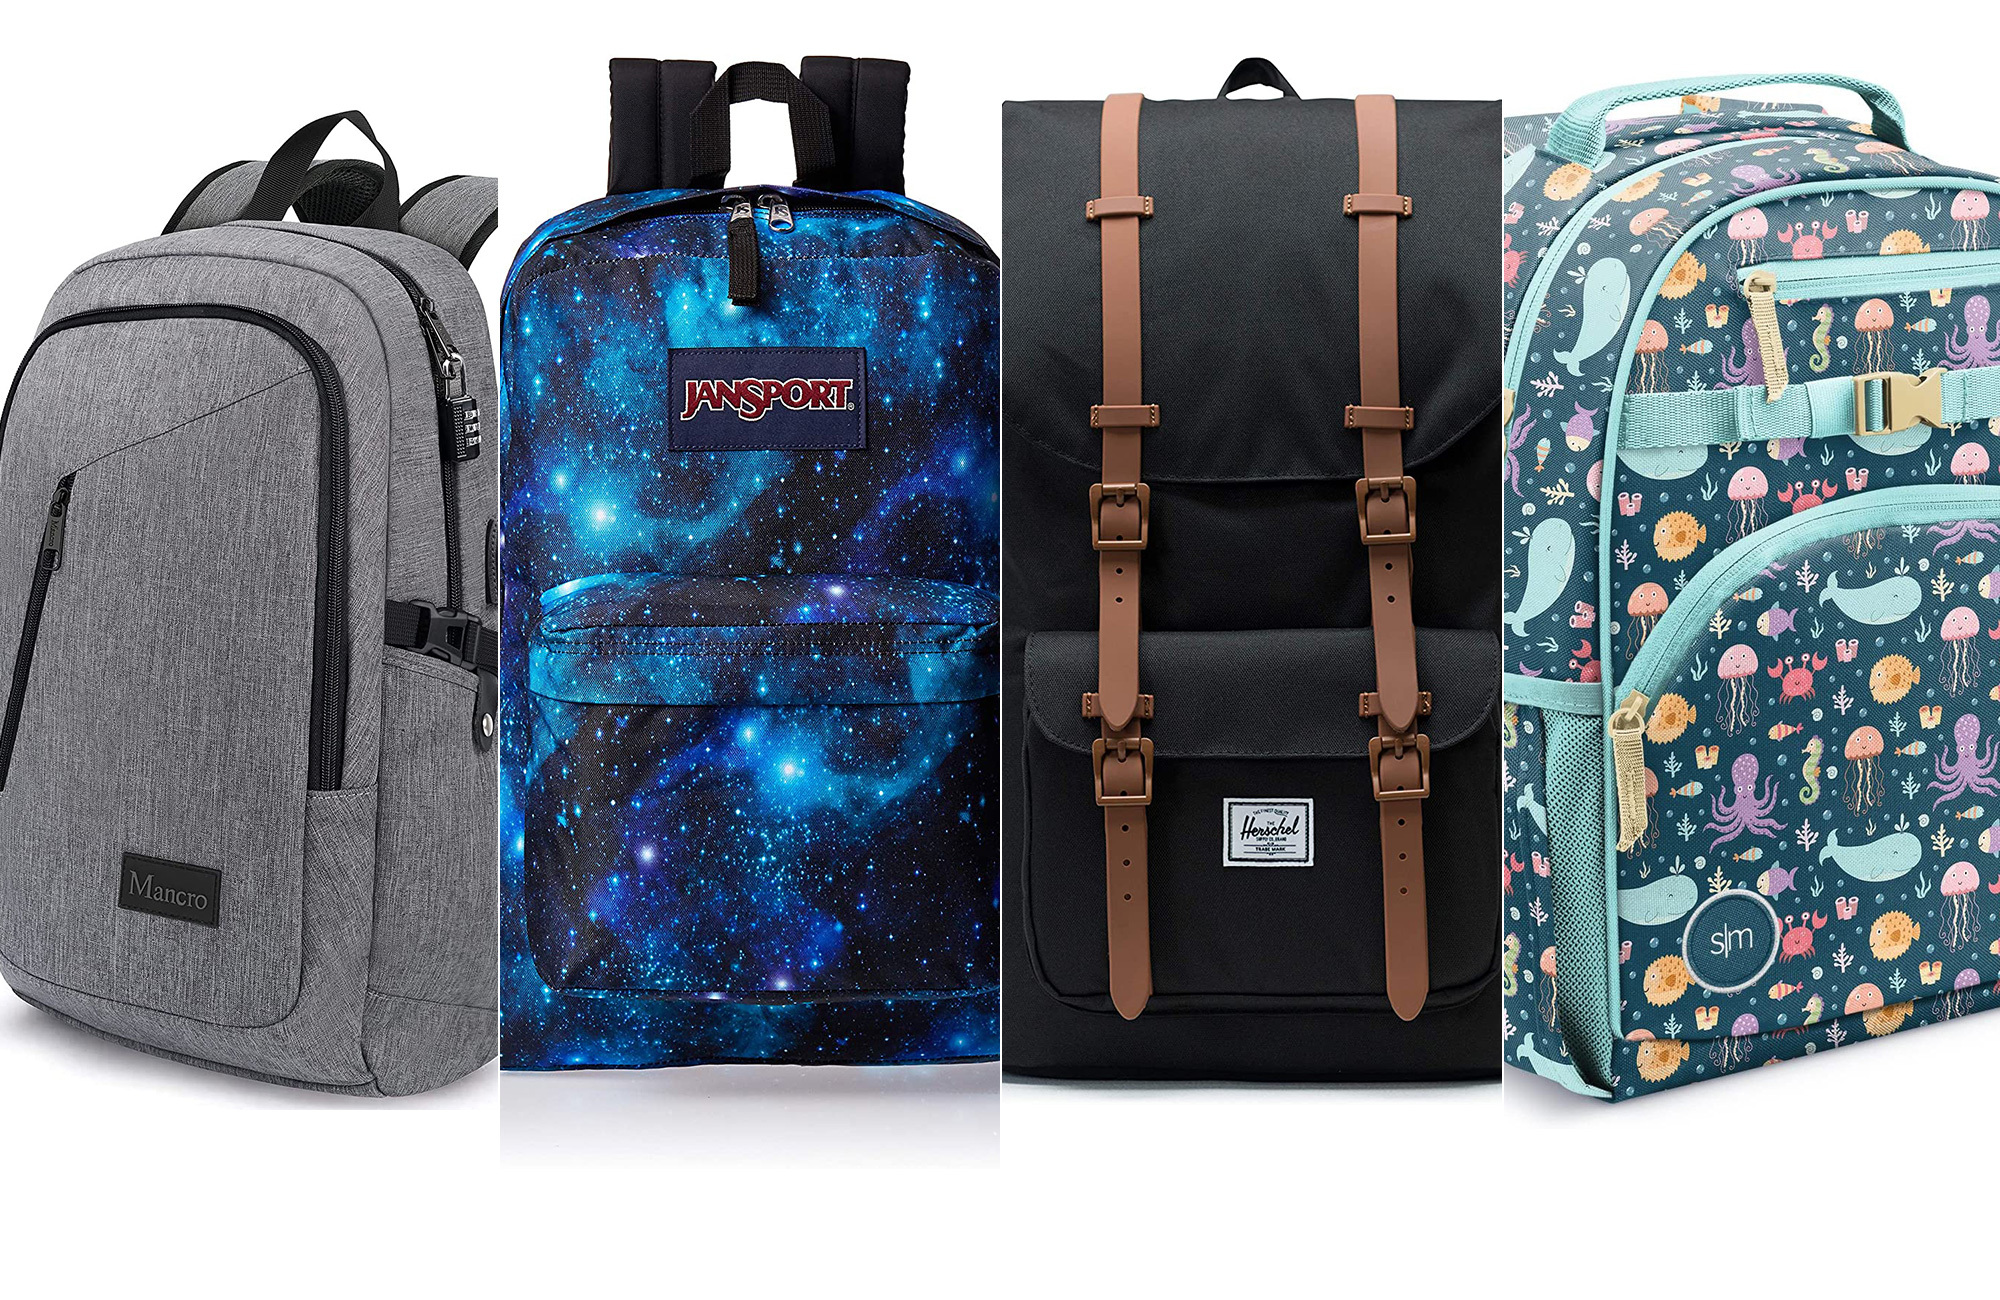 Are Expensive School Backpacks Worth The Money?